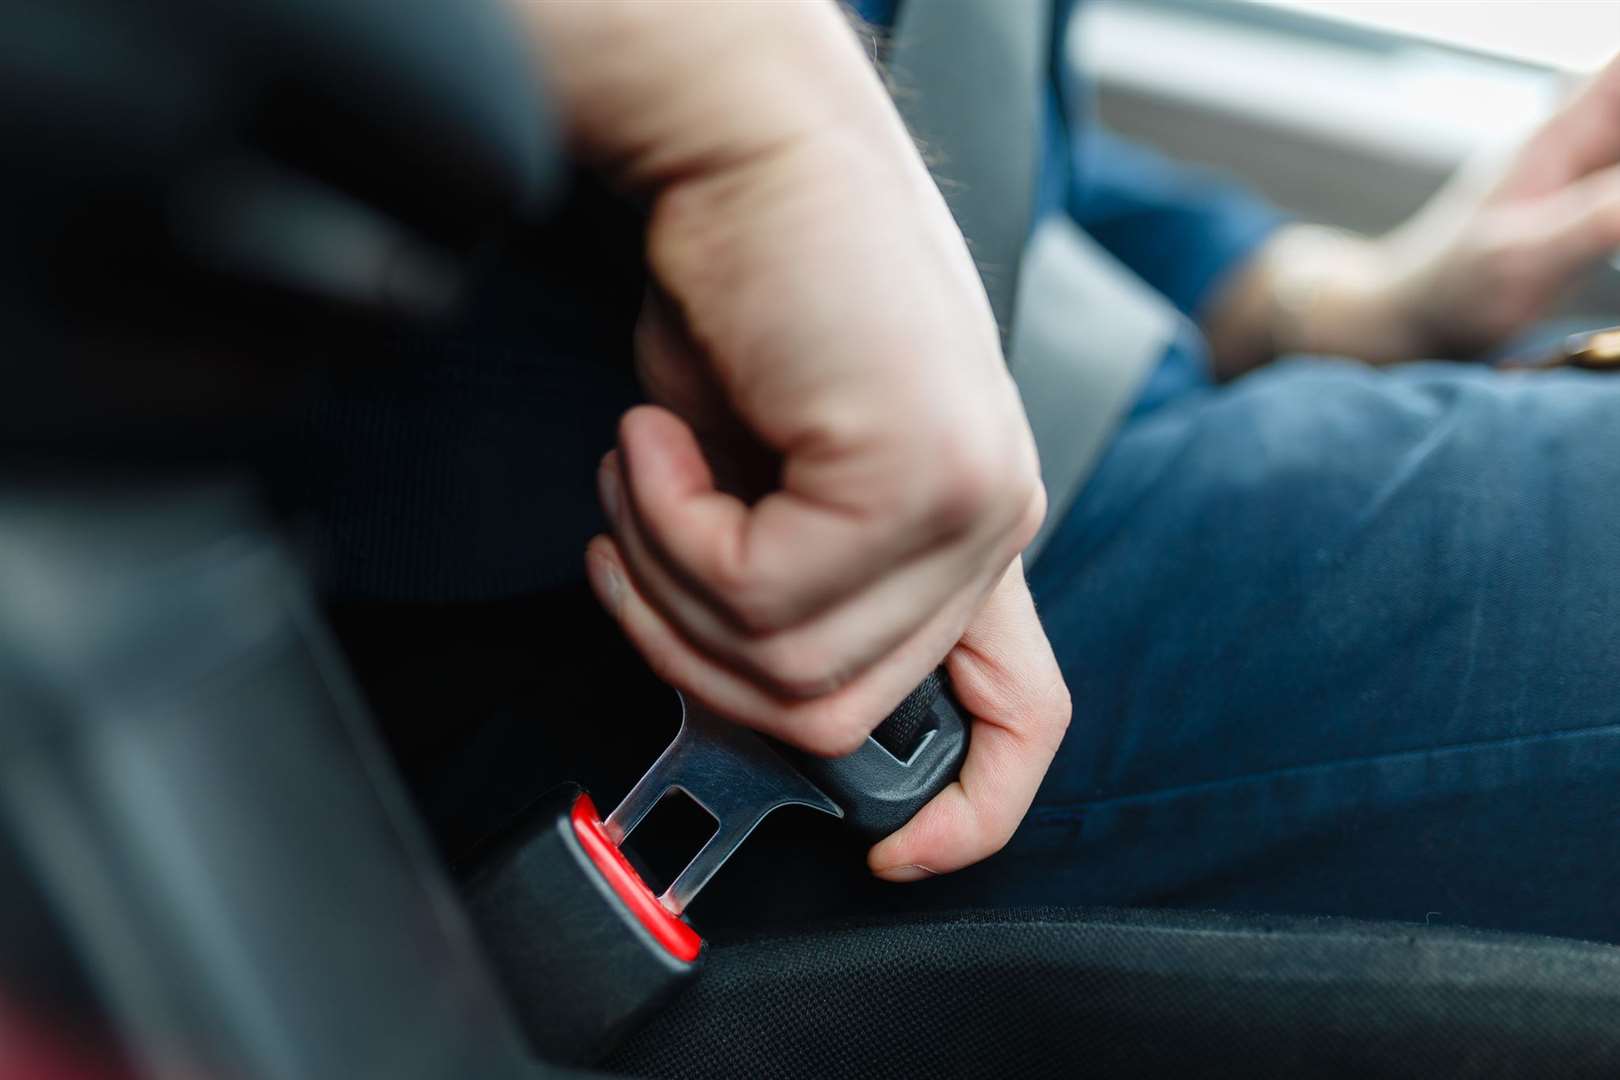 Local police have added their voice to safety calls on seat belts.